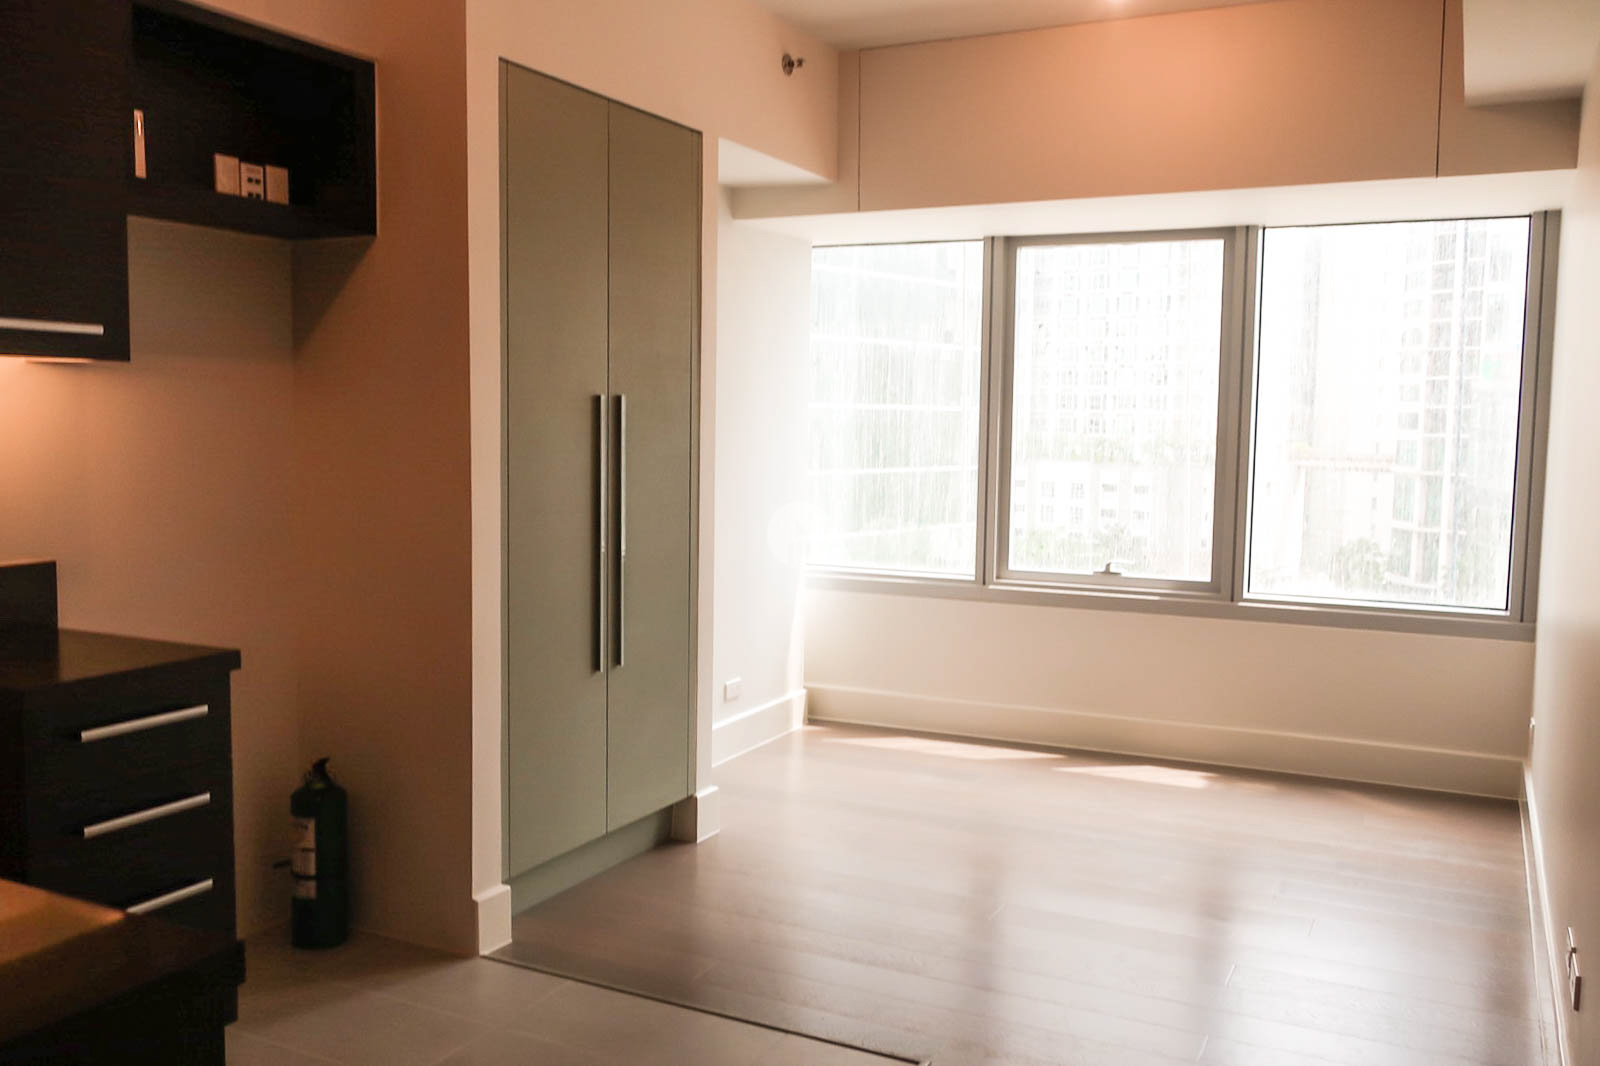 Condo Unit in Proscenium Residences Tower by Golden Sphere Realty